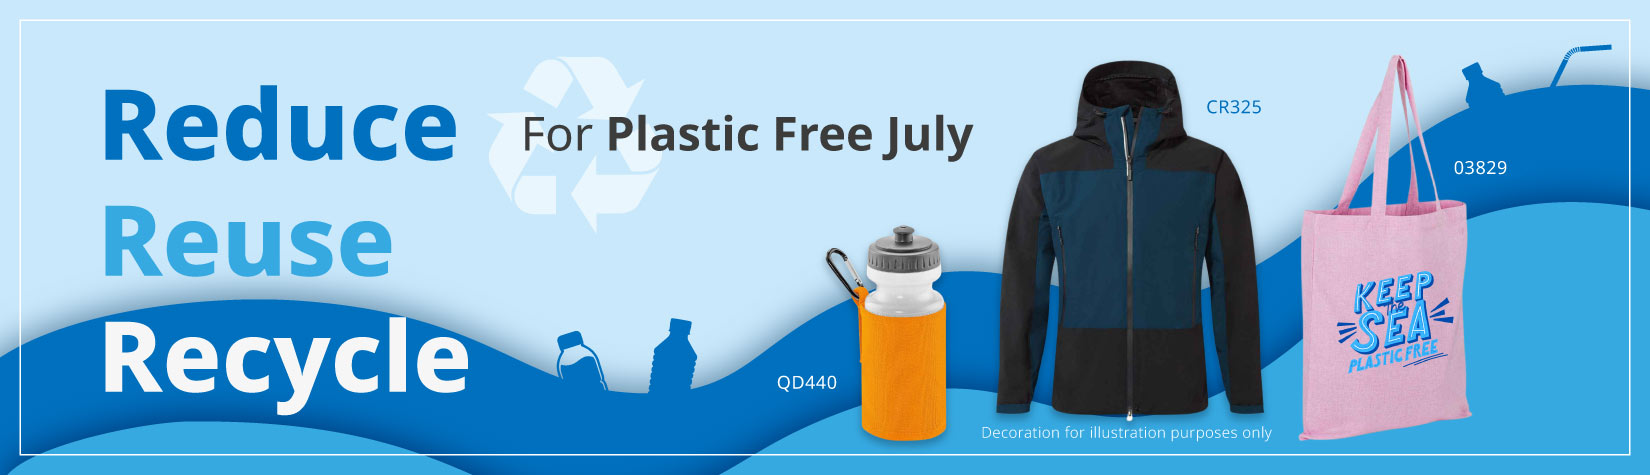 Get ready for Plastic Free July